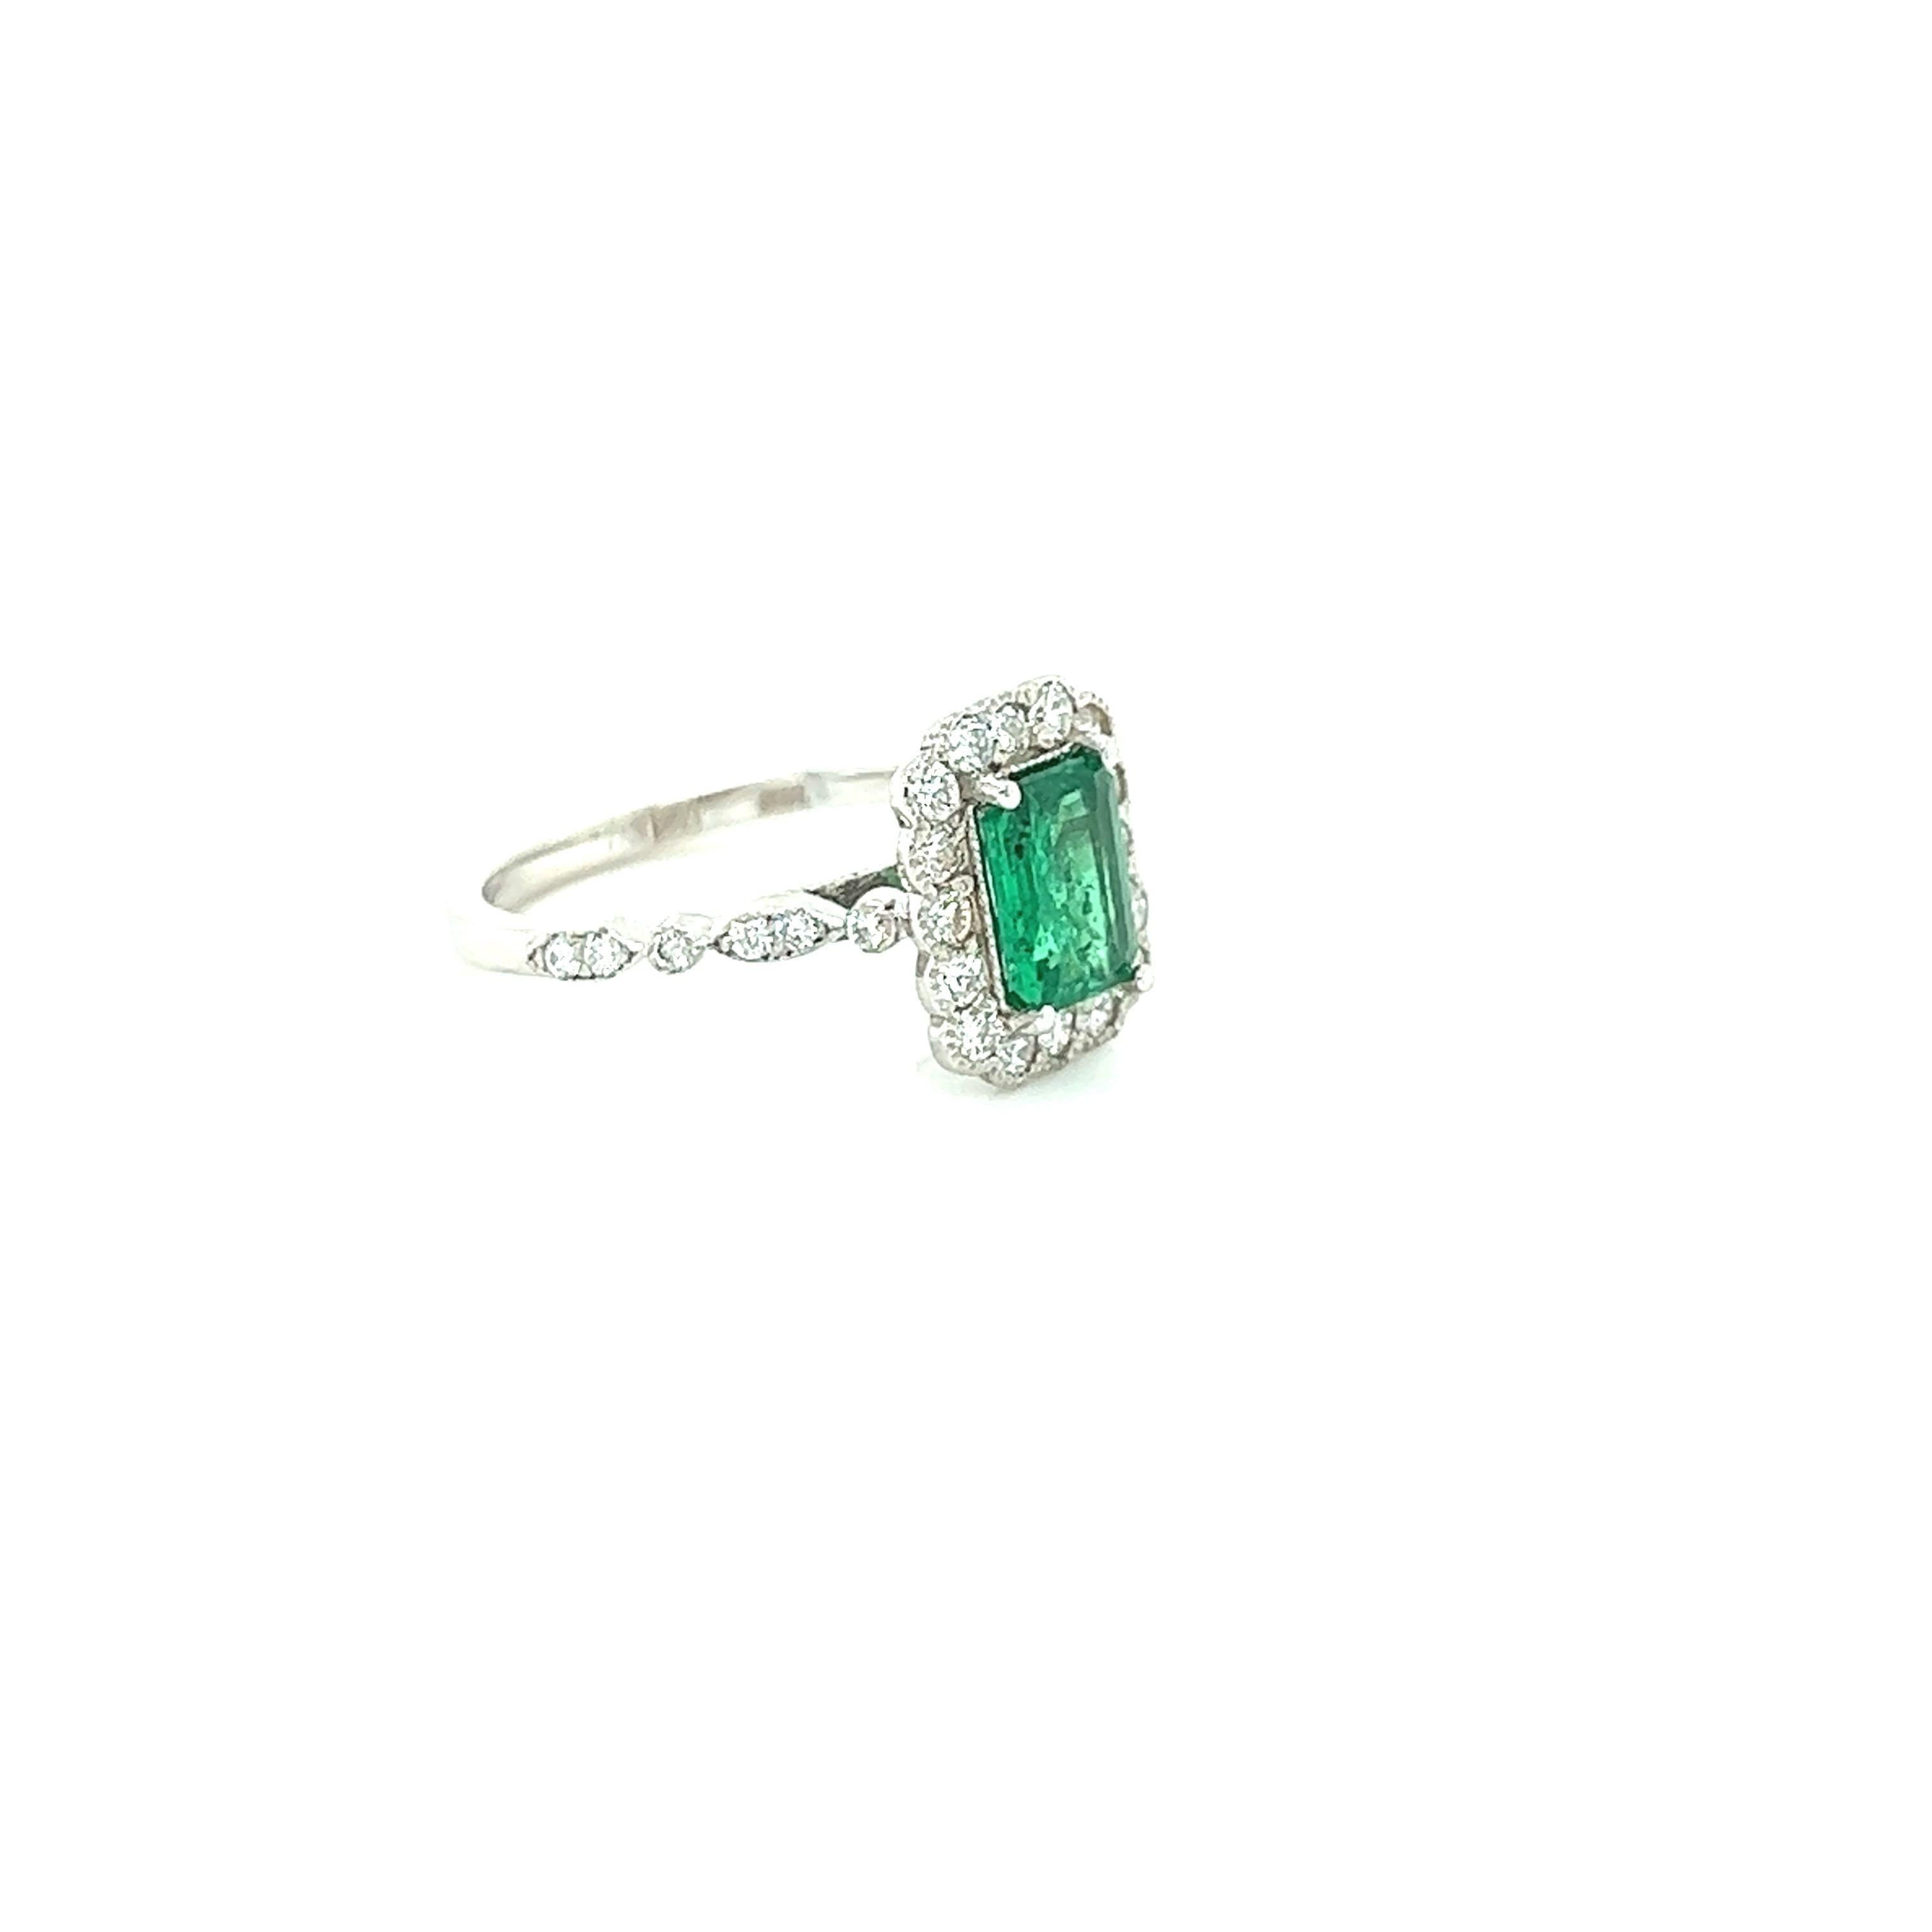 A beautiful & classic setting holding a Natural Emerald Cut Emerald that weighs 0.95 carats and is surrounded by 28 Round Cut Diamonds that weigh 0.54 carats with a clarity & color of SI1-F.  The total carat weight of the ring is 1.49 carats.

The